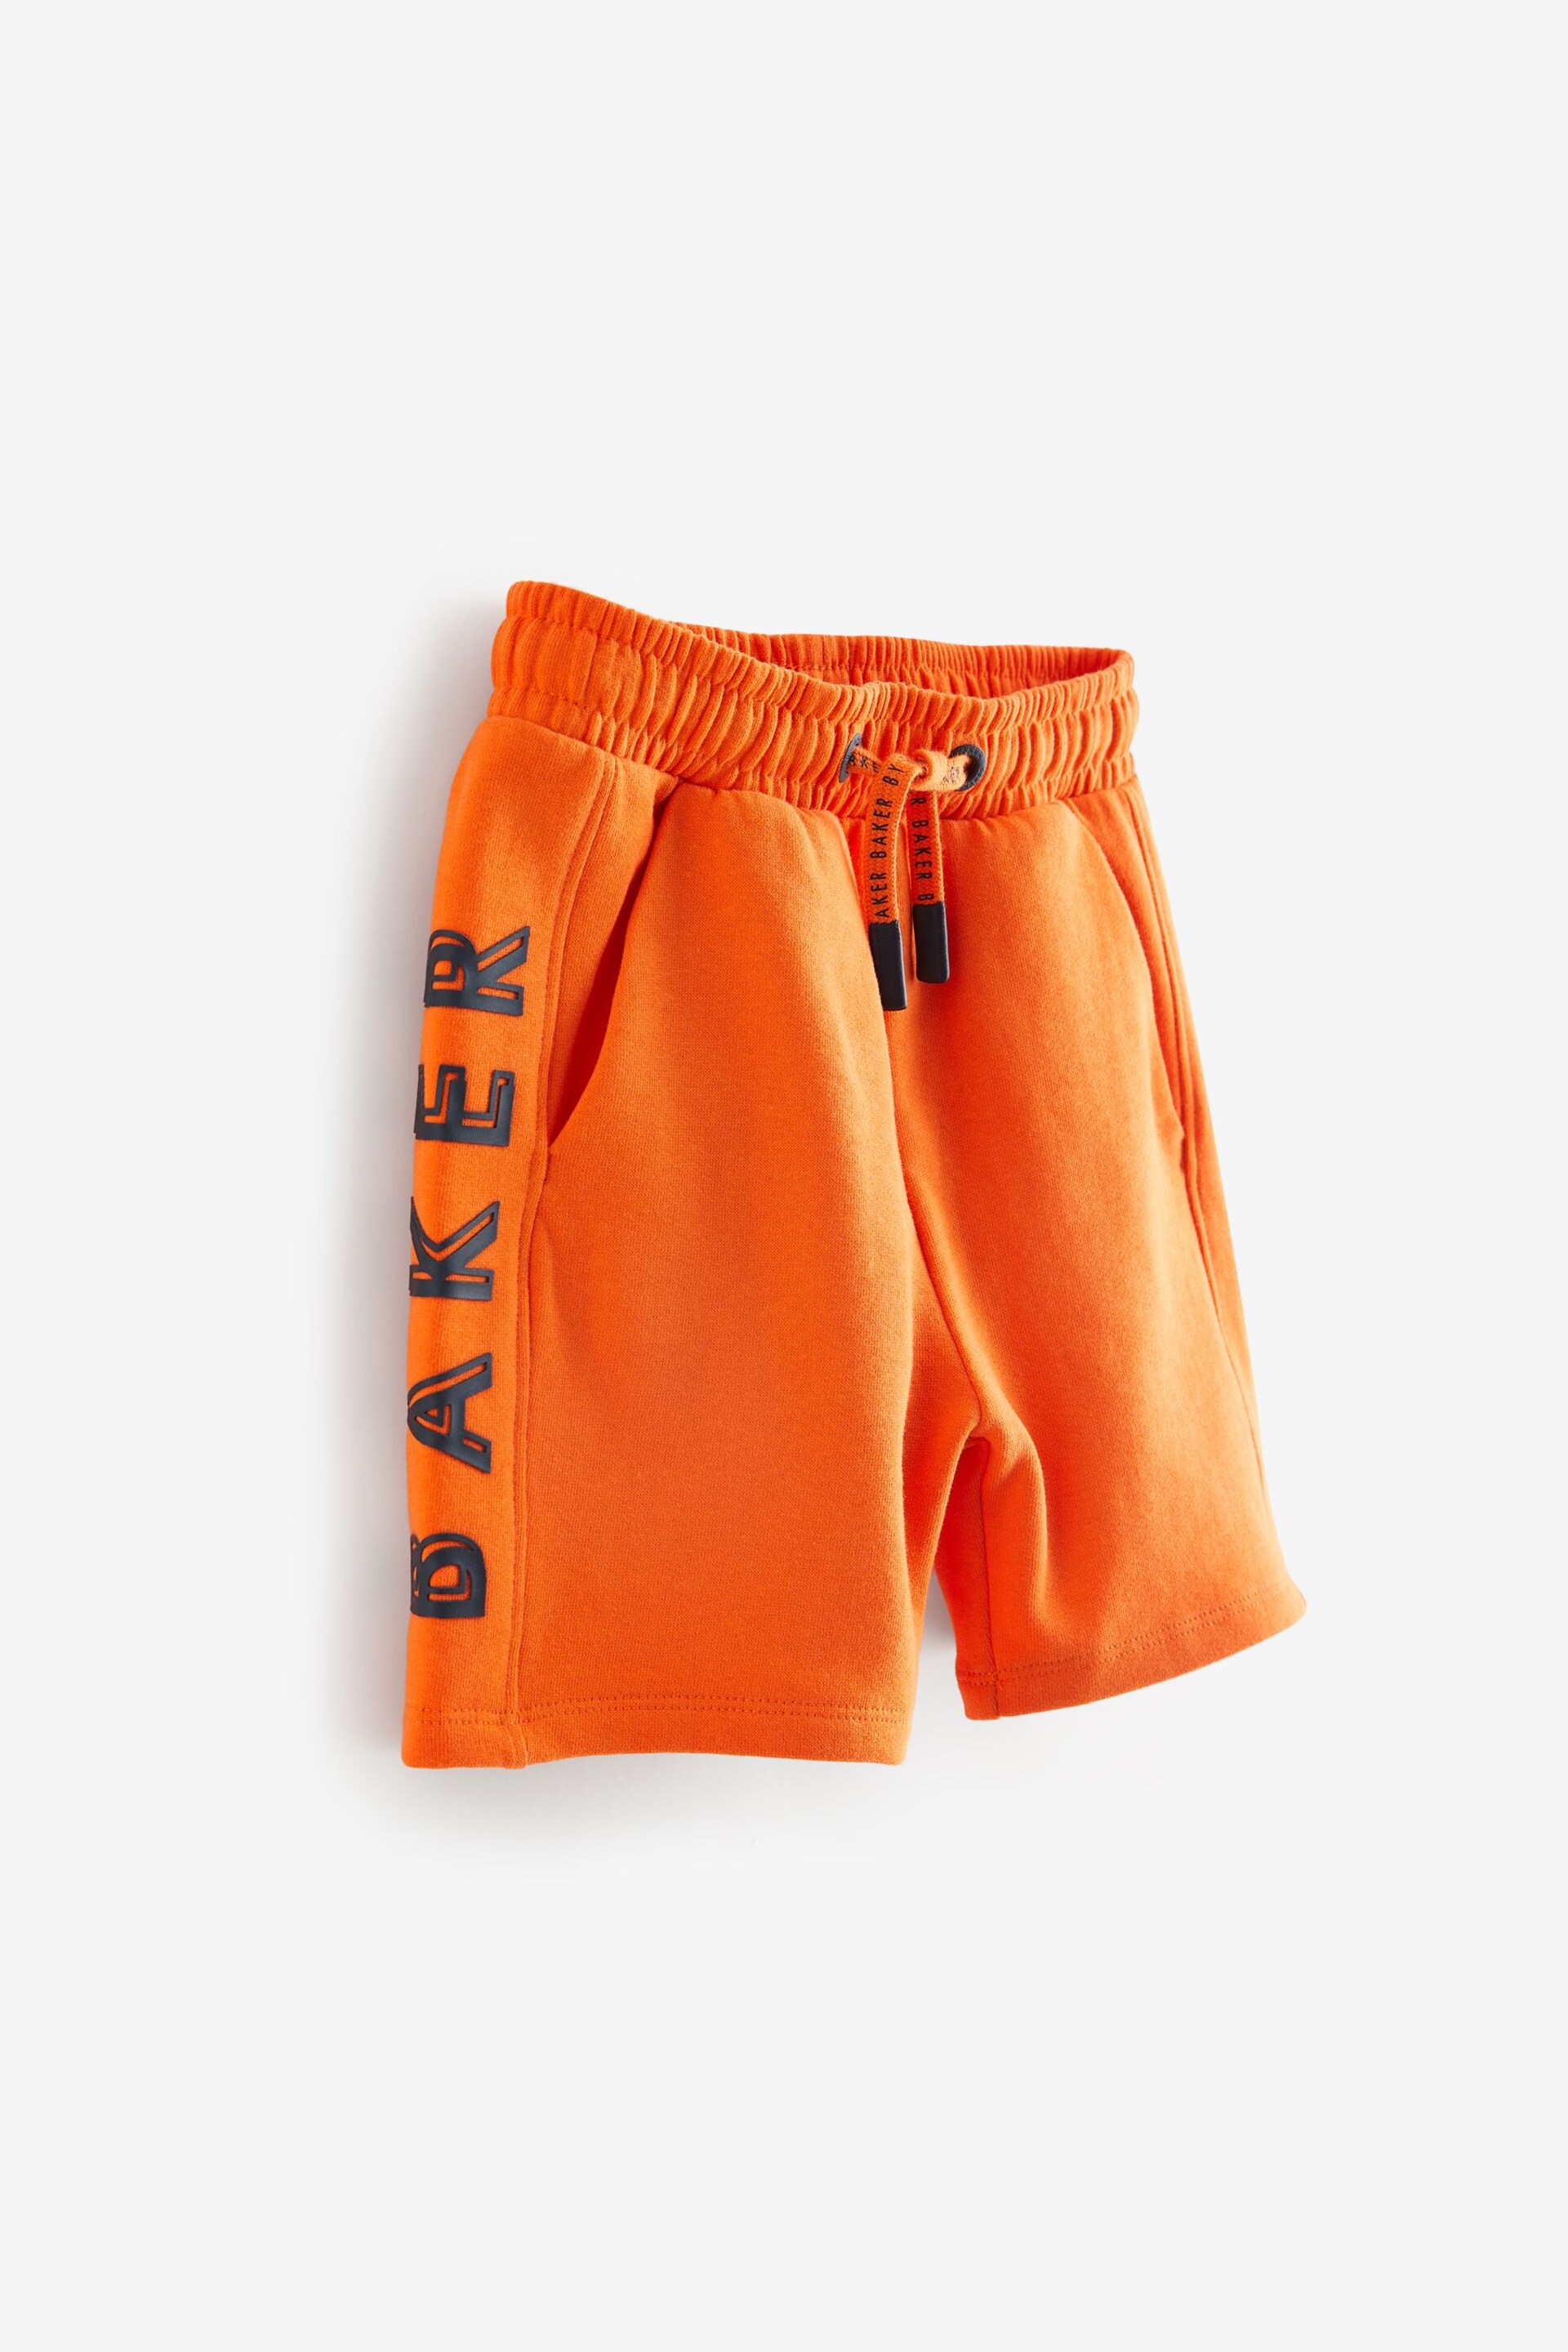 Baker by Ted Baker T-Shirt and Shorts Set - Image 11 of 13